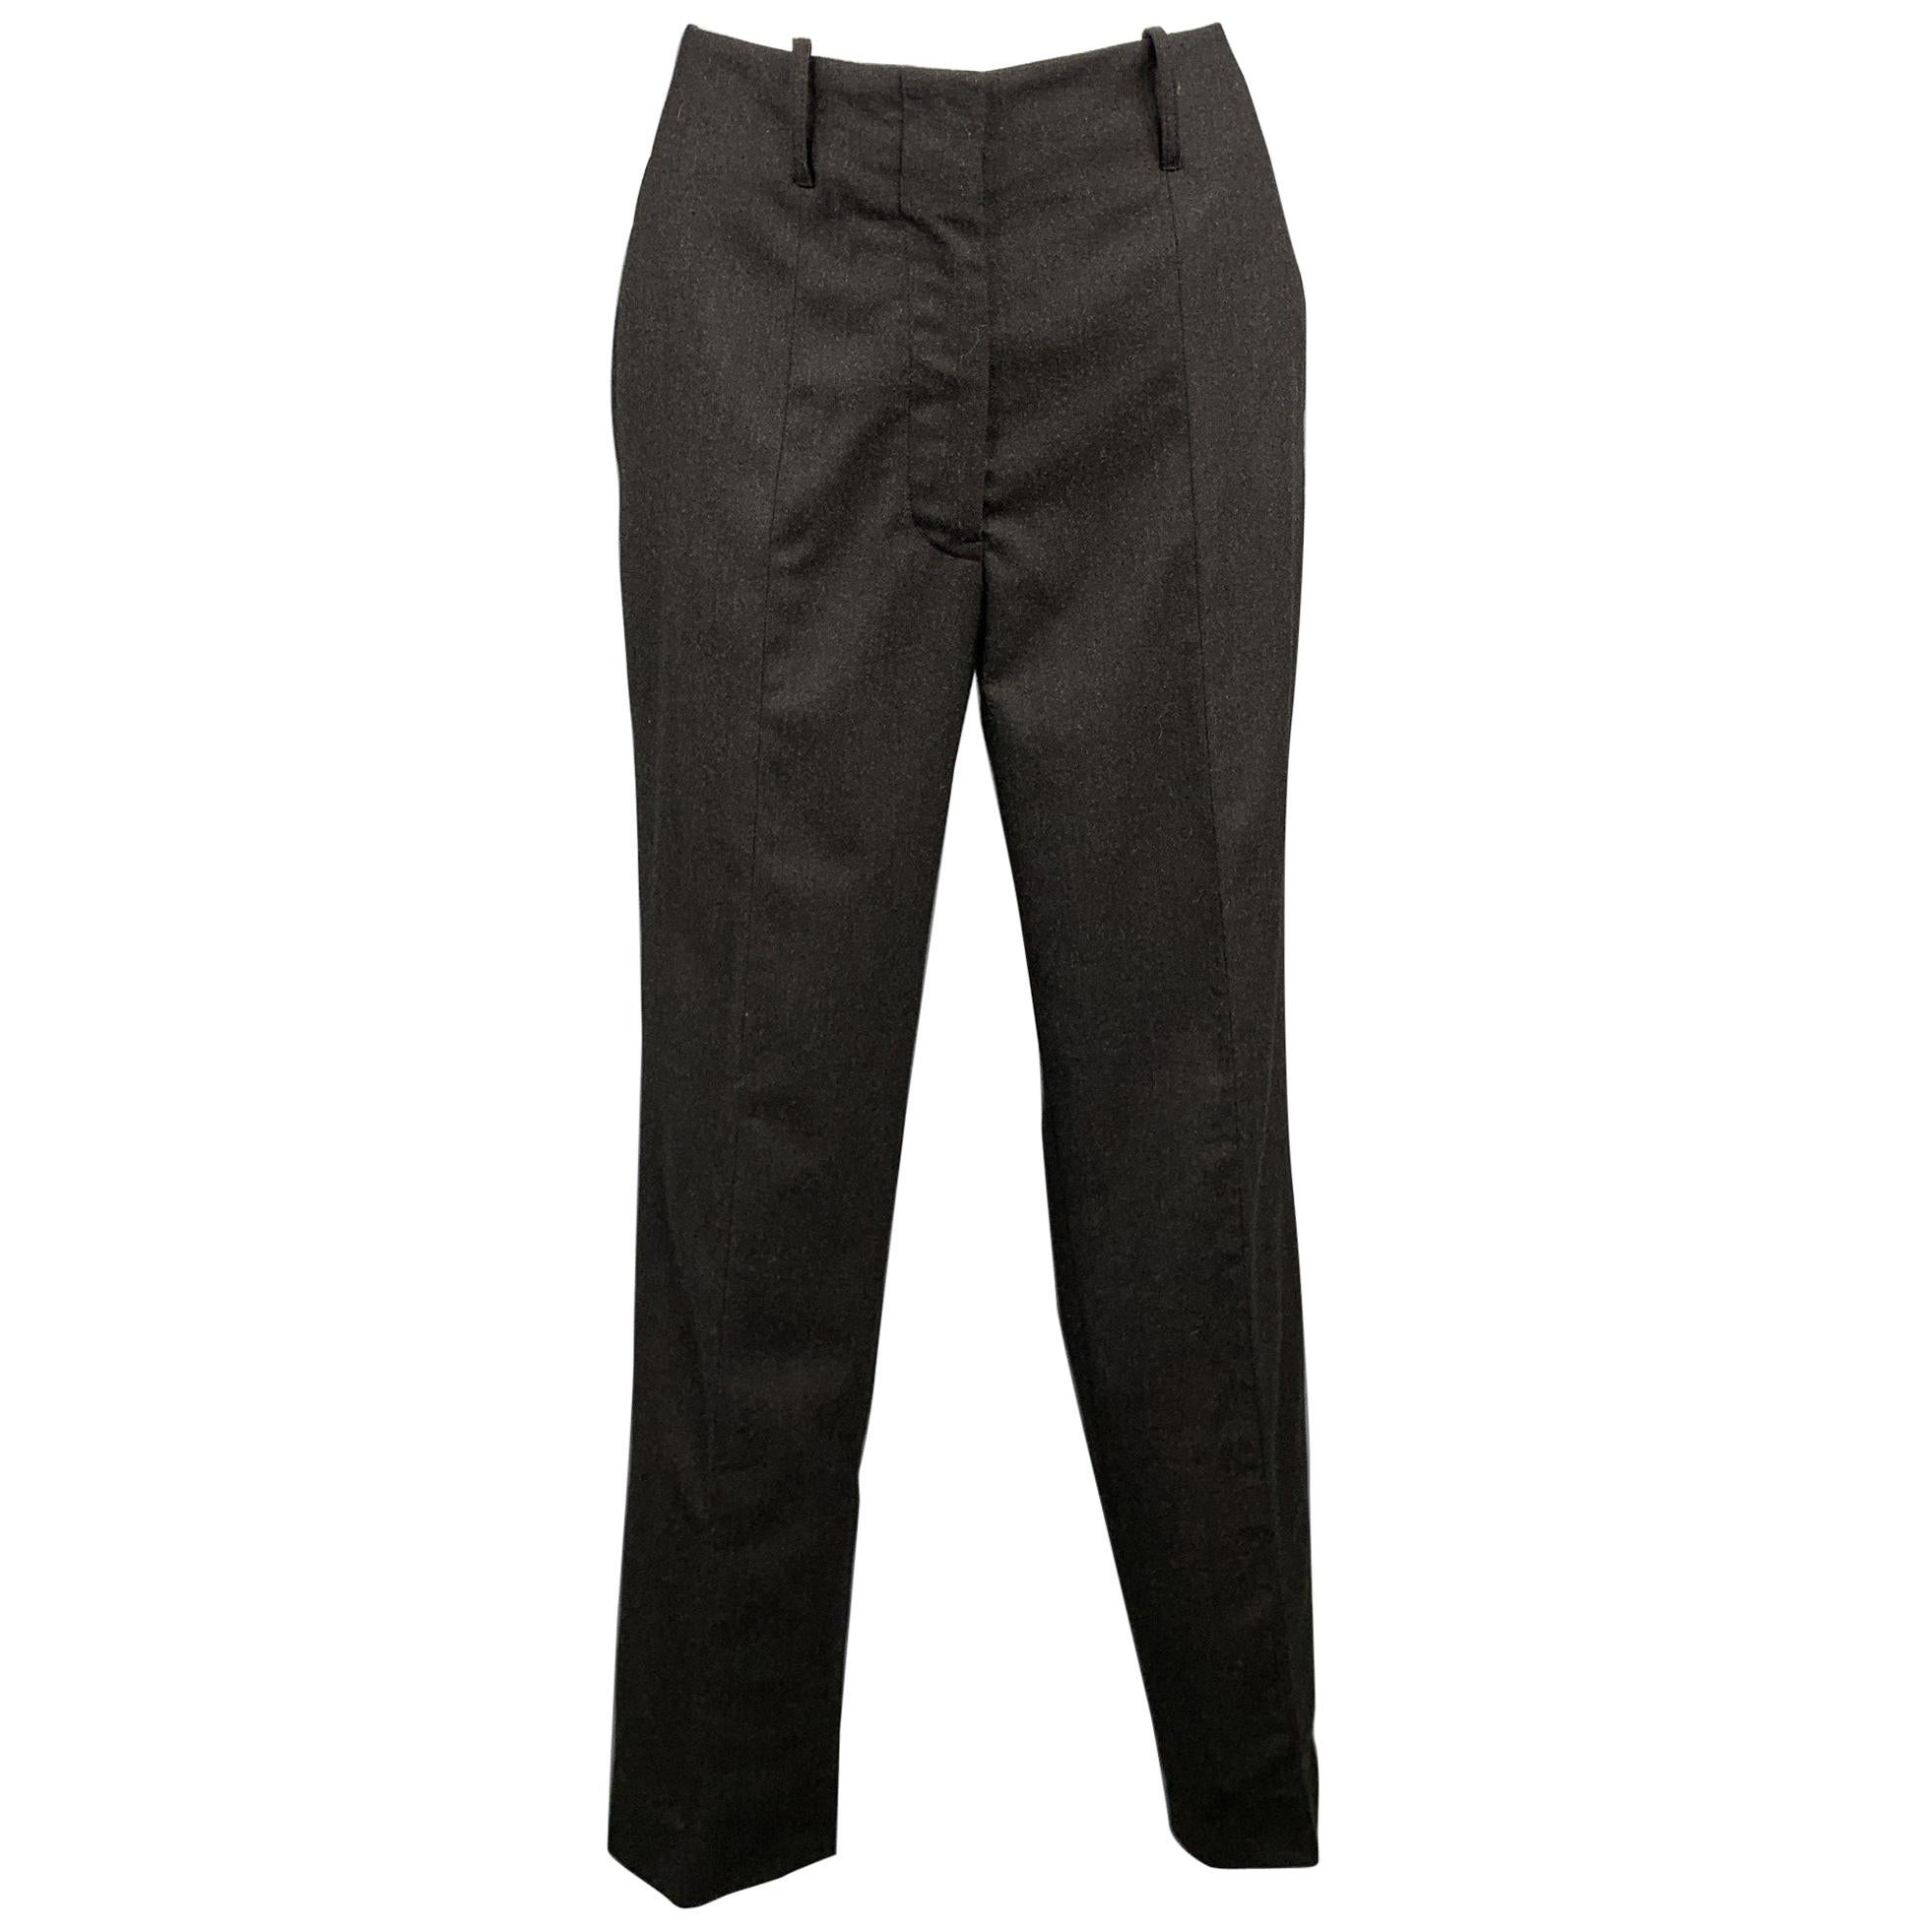 JOHN GALLIANO Size 30 Charcoal Blue Logo Print Jeans For Sale at 1stDibs